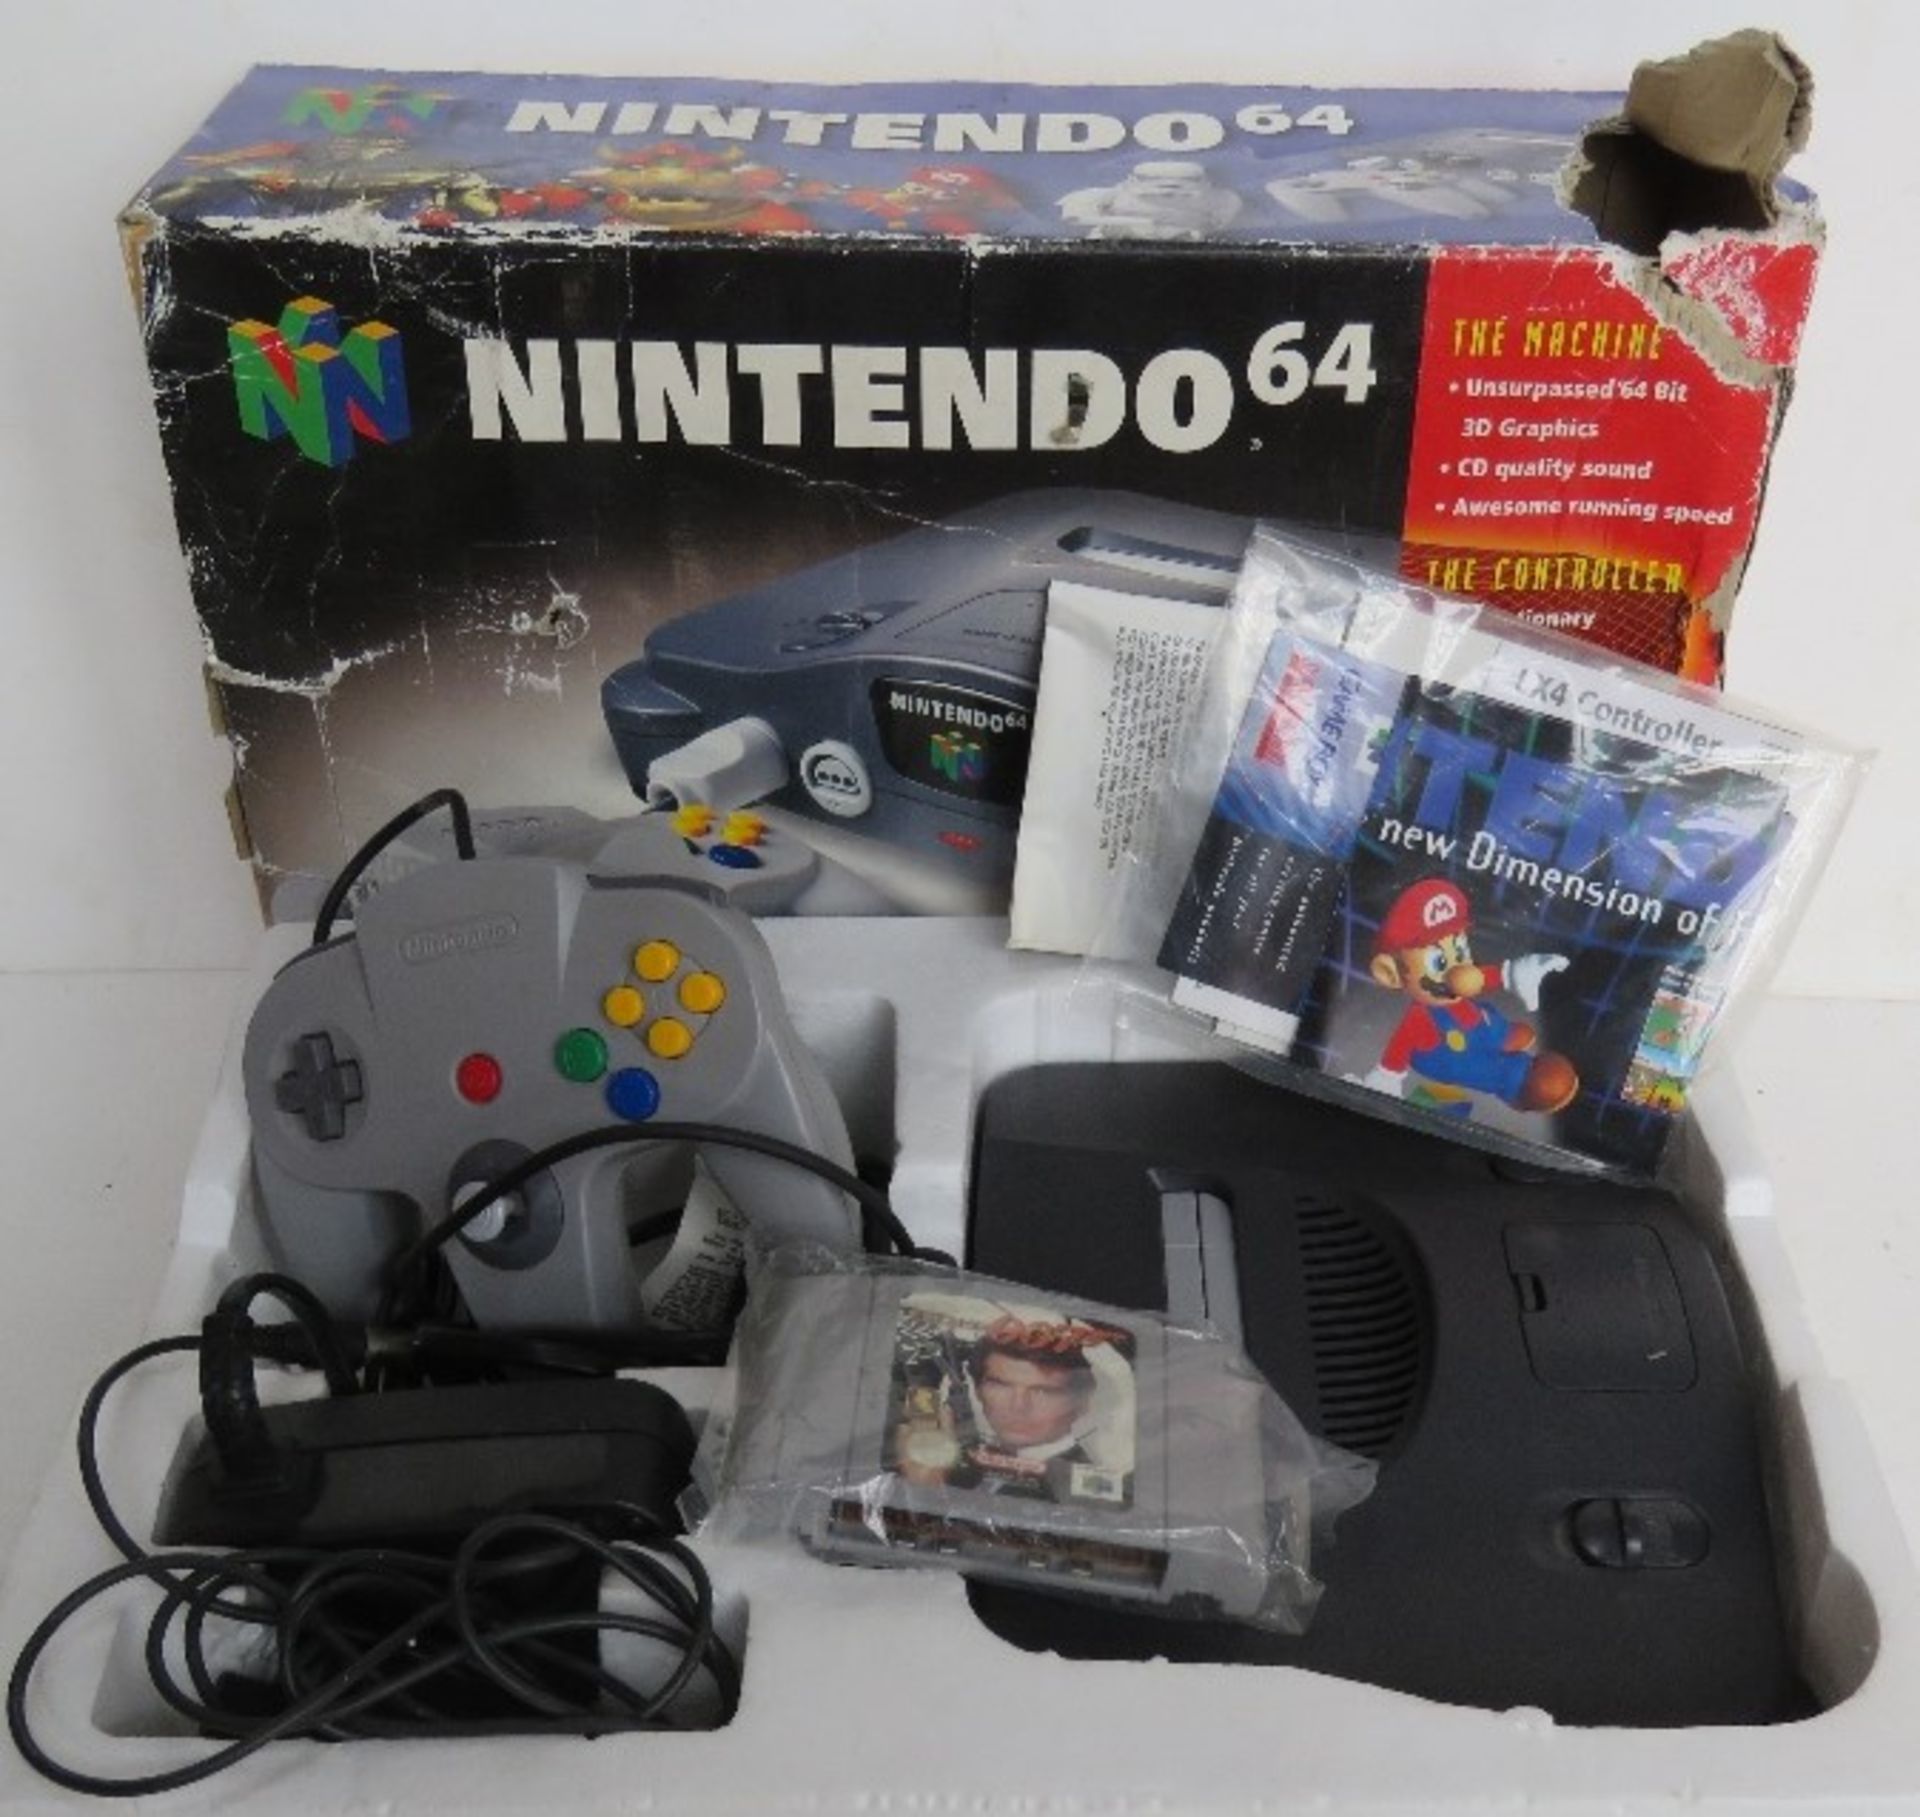 A Nintendo 64 in original box with controller and GoldenEye 007 game. Box a/f.